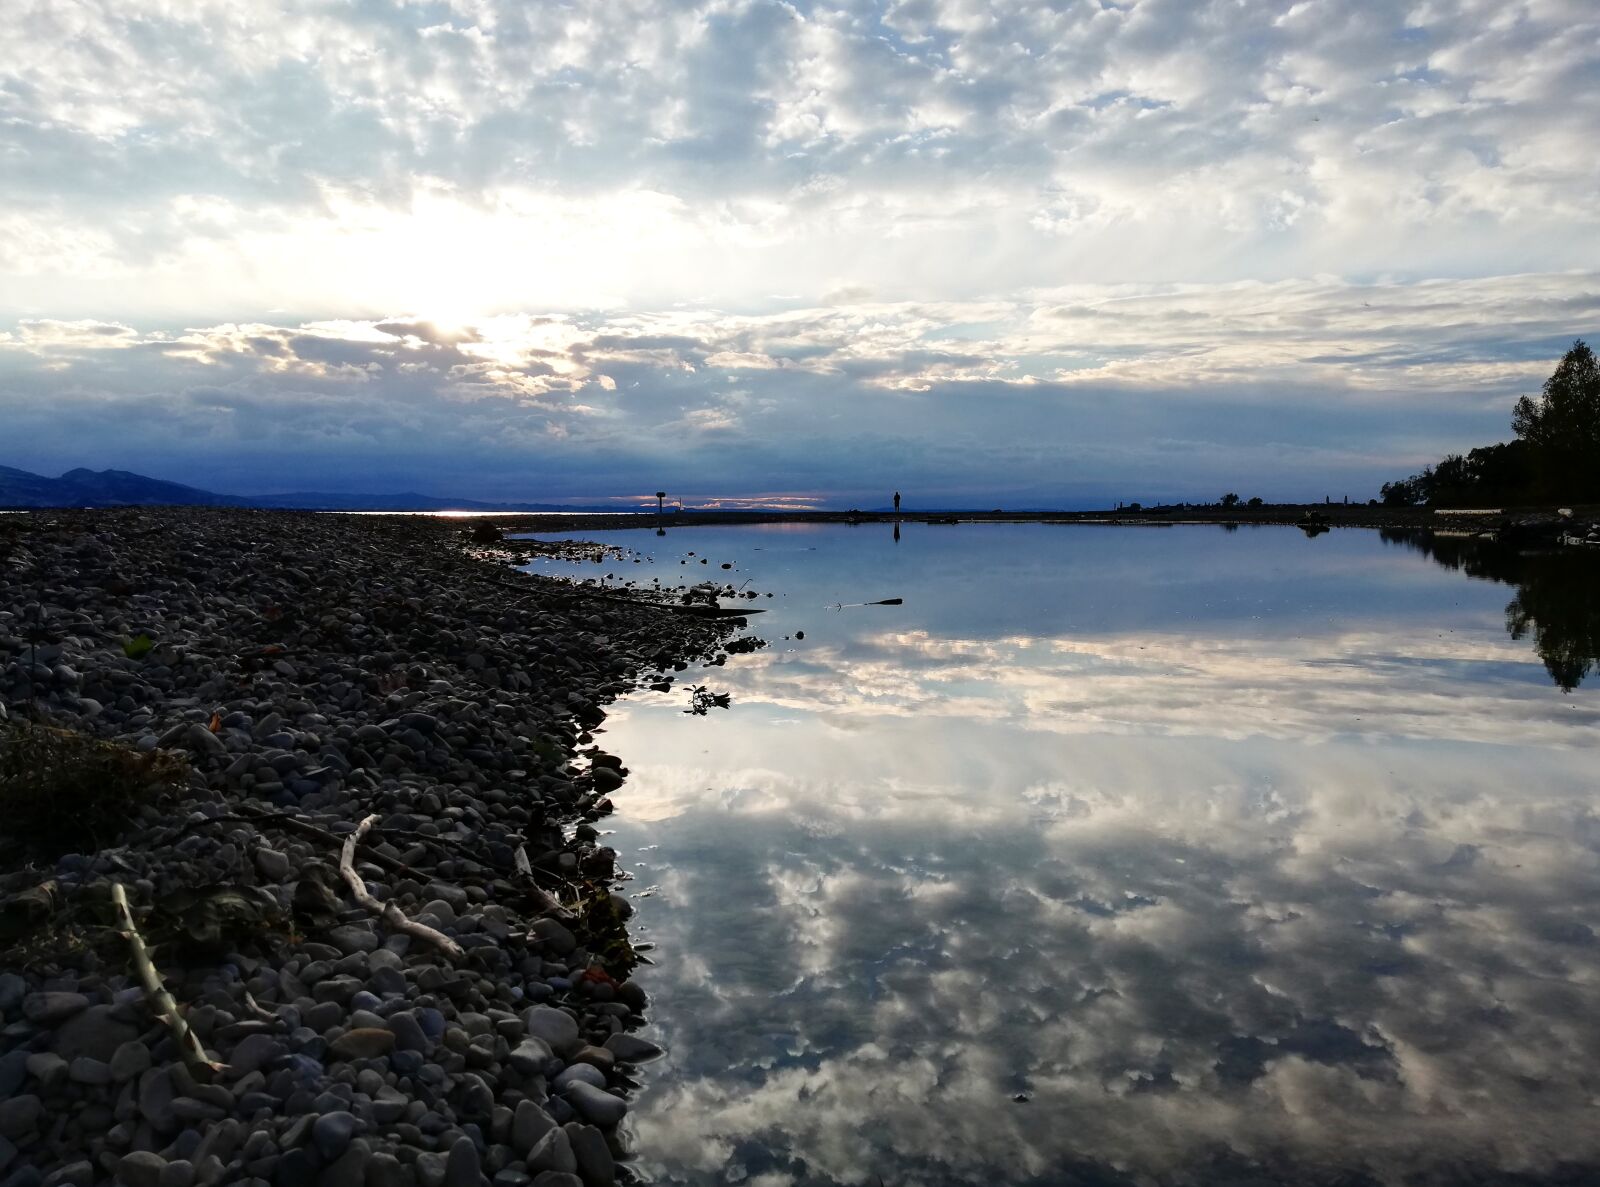 HUAWEI ANE-LX1 sample photo. Water, clouds, more photography